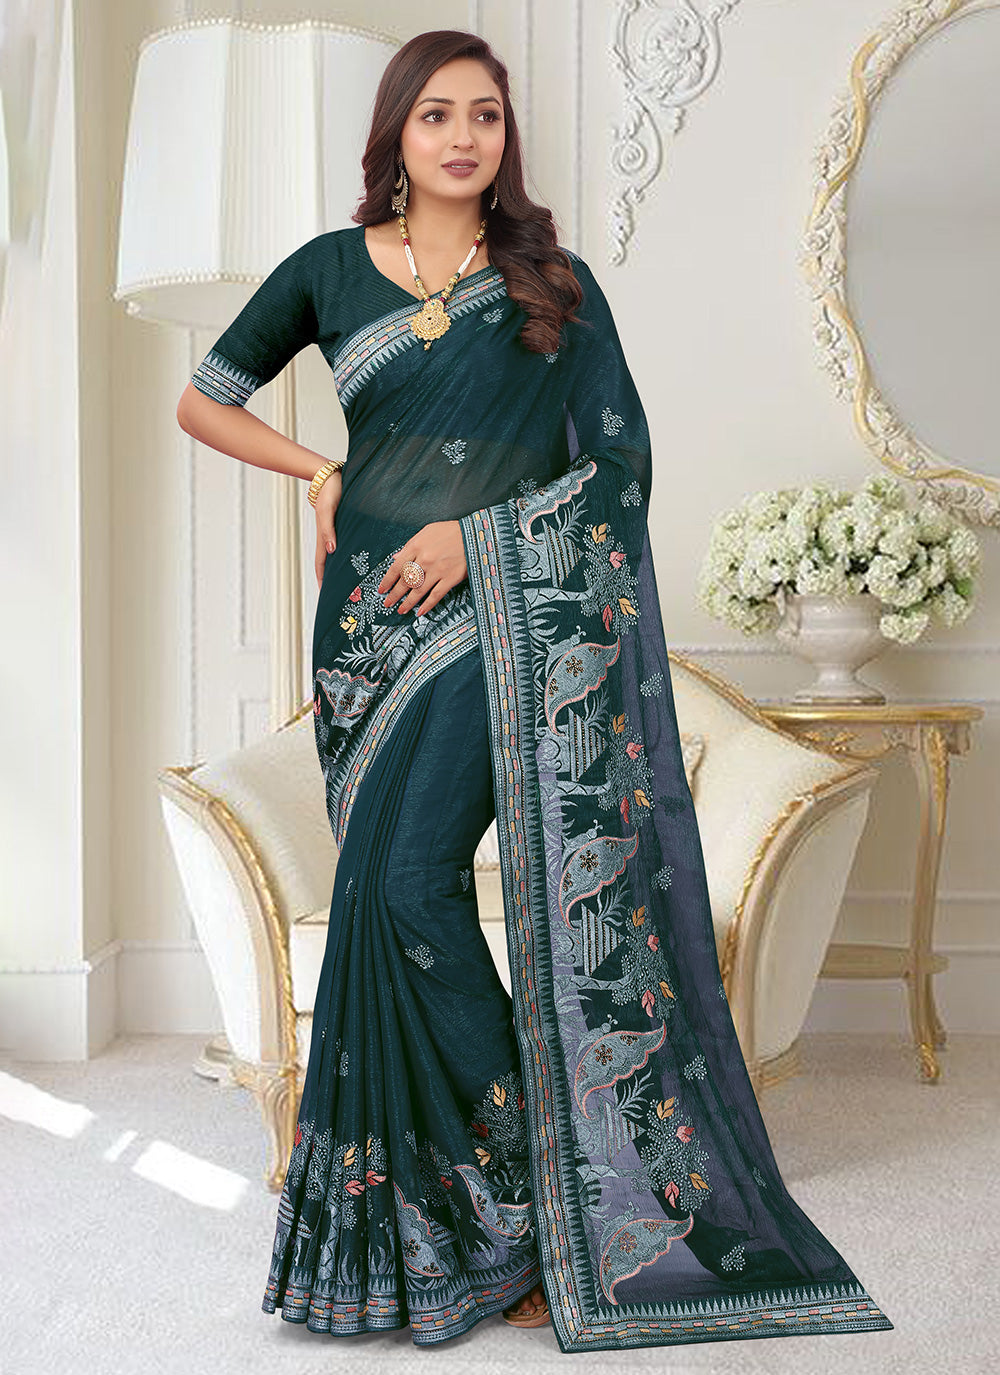 Contemporary Style Saree For Engagement